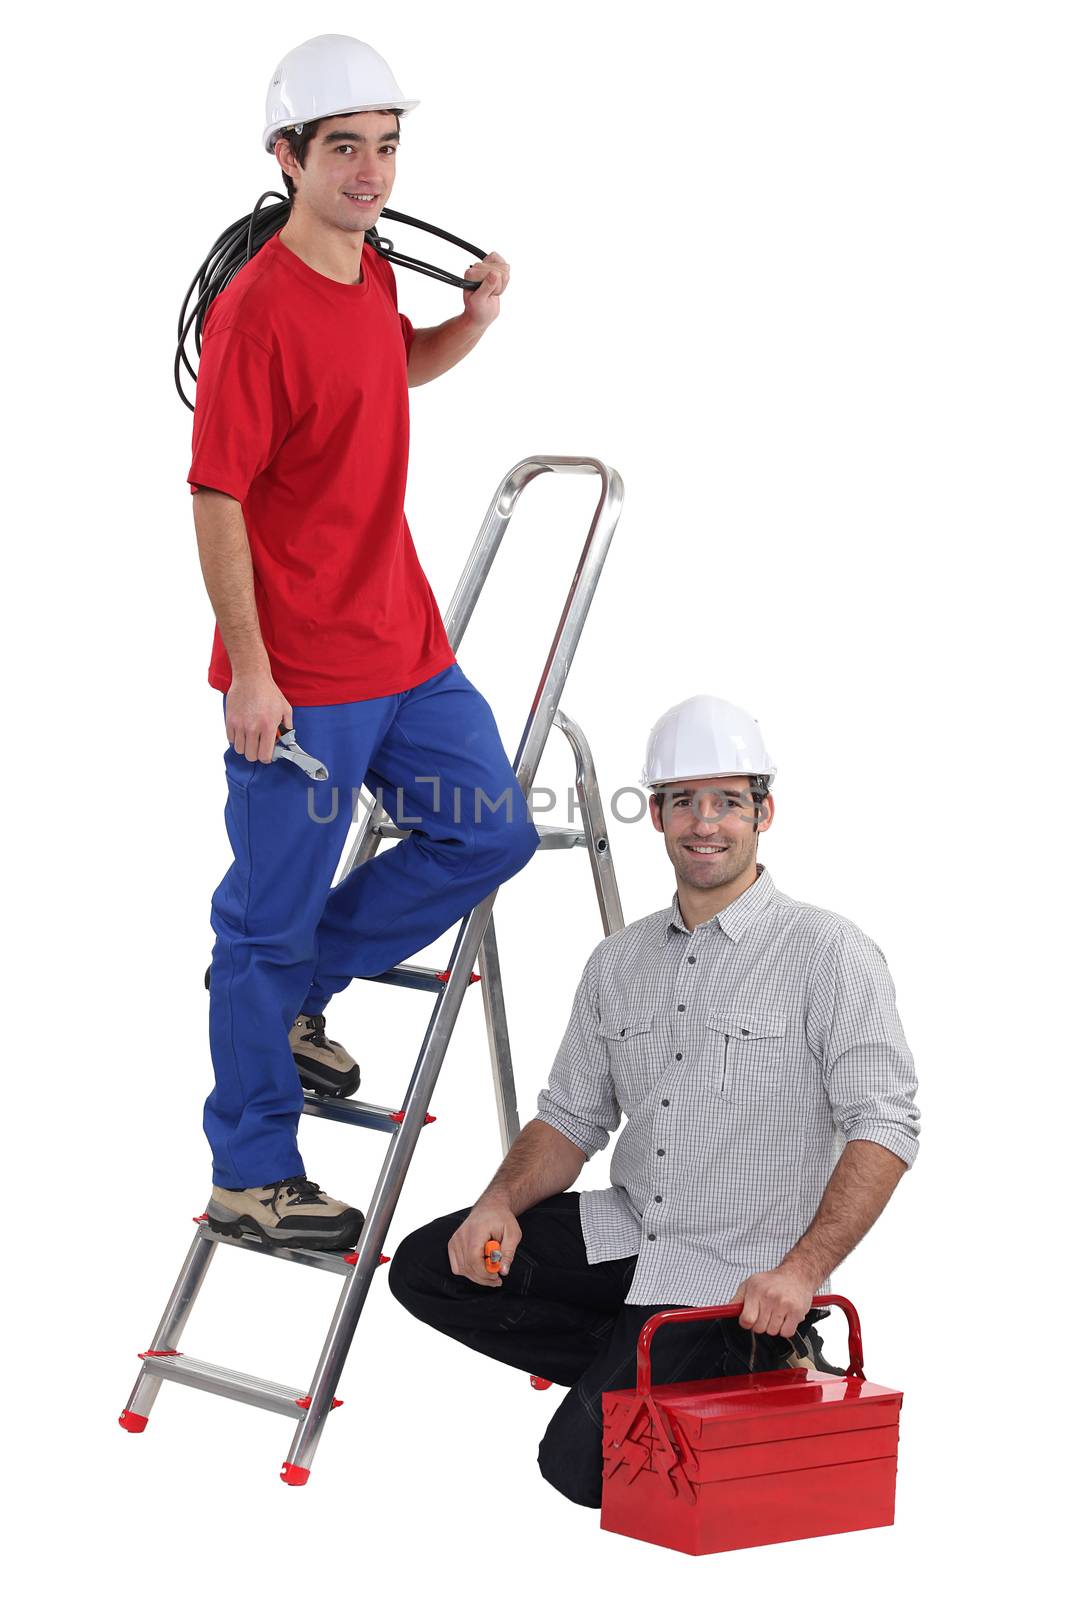 Electrician training young worker by phovoir